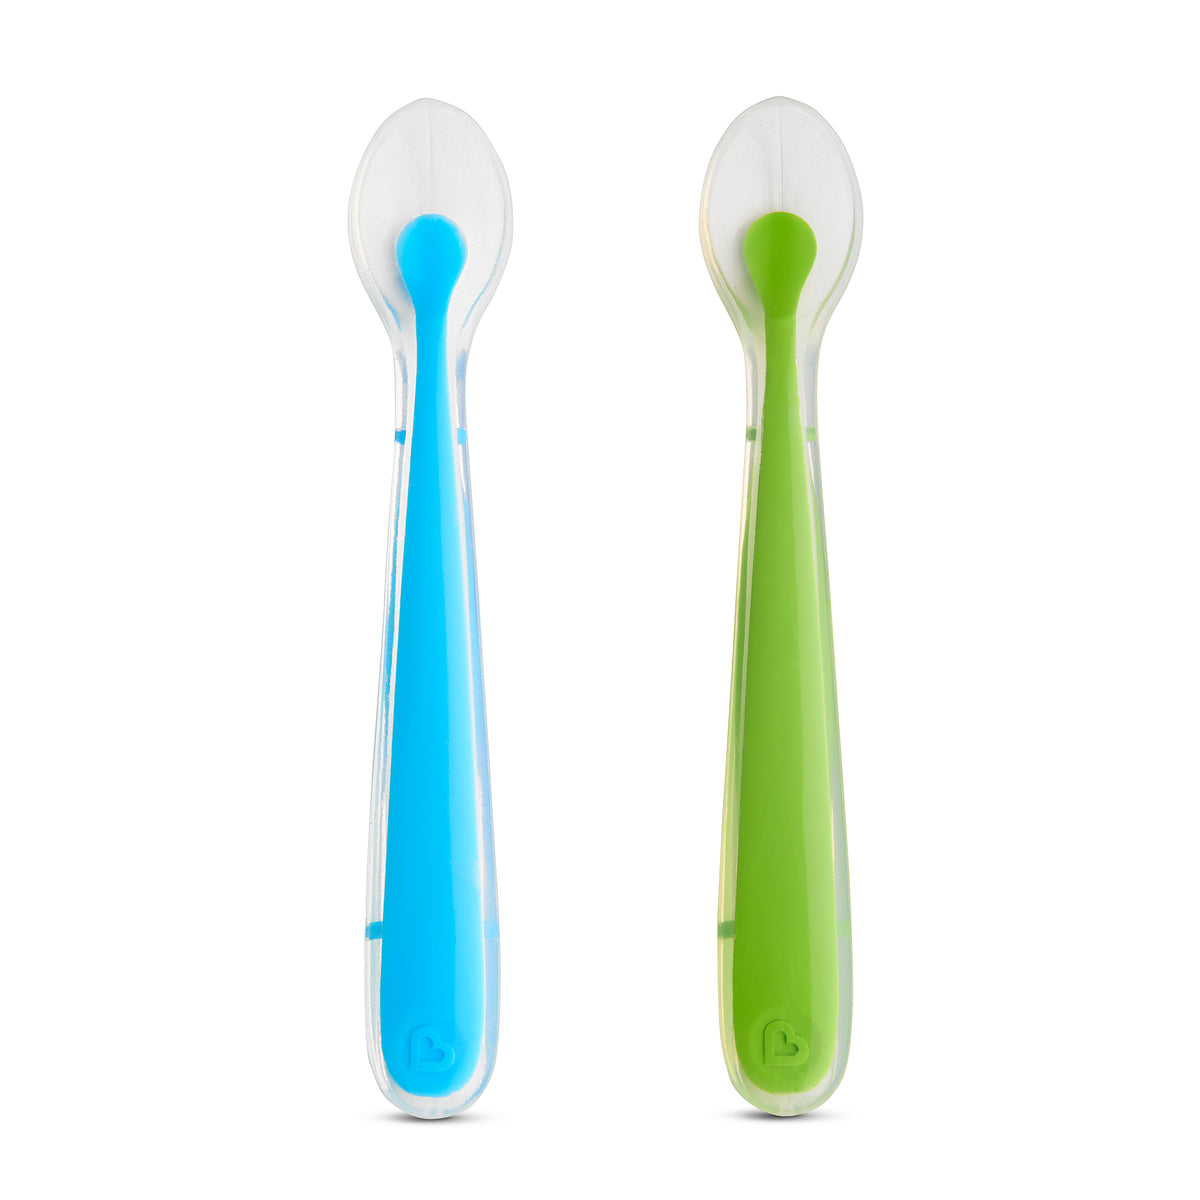 Gentle™ Silicone Spoons - 2 Pack